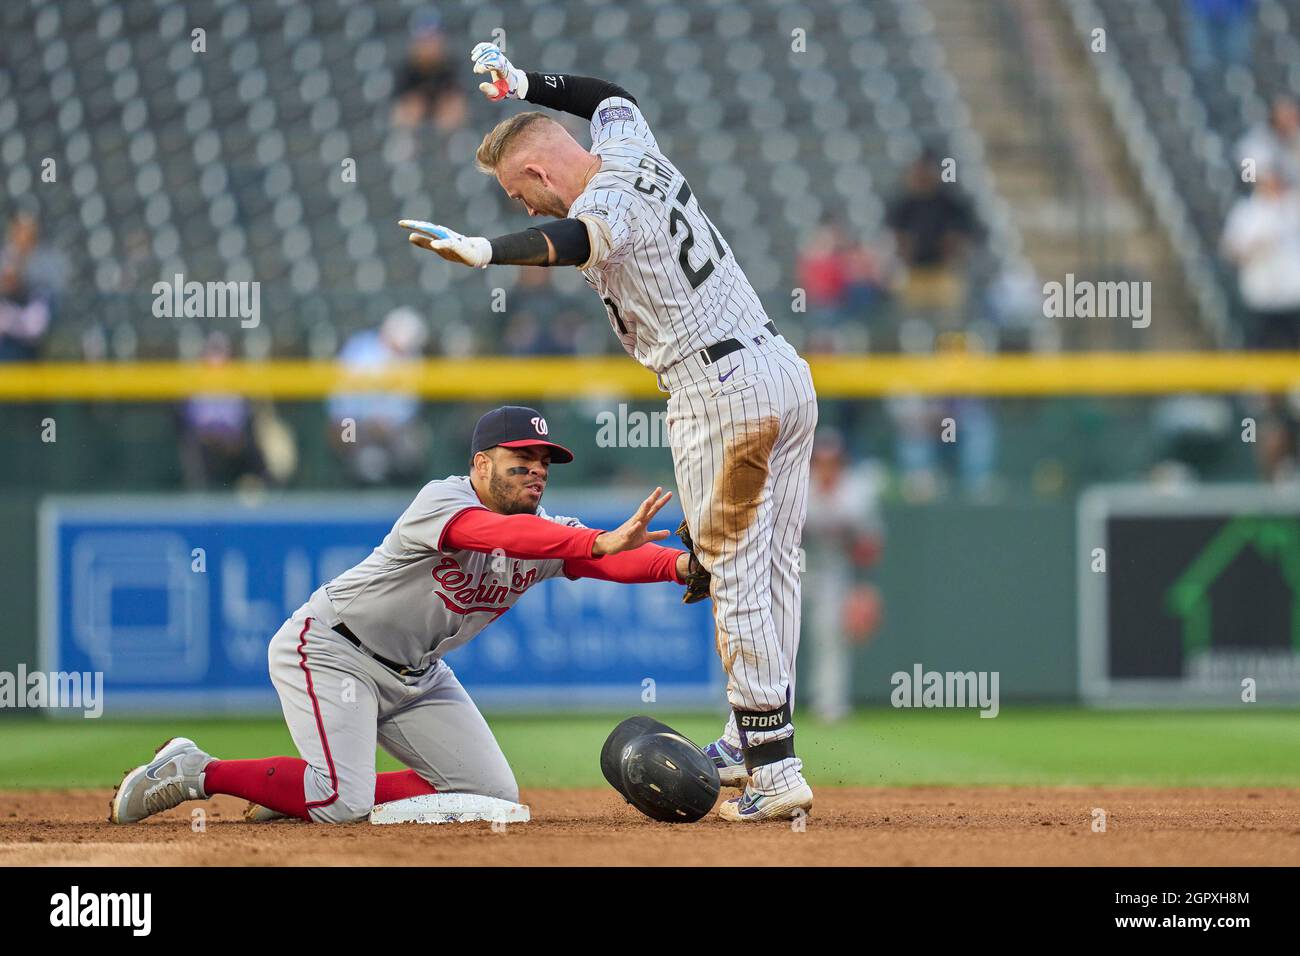 Denver CO, USA. 29th Sep, 2021. Washington second basemen Luis Garcia (2) makes a play during the game with Washington Nationals and Colorado Rockies held at Coors Field in Denver Co. David Seelig/Cal Sport Medi. Credit: csm/Alamy Live News Stock Photo